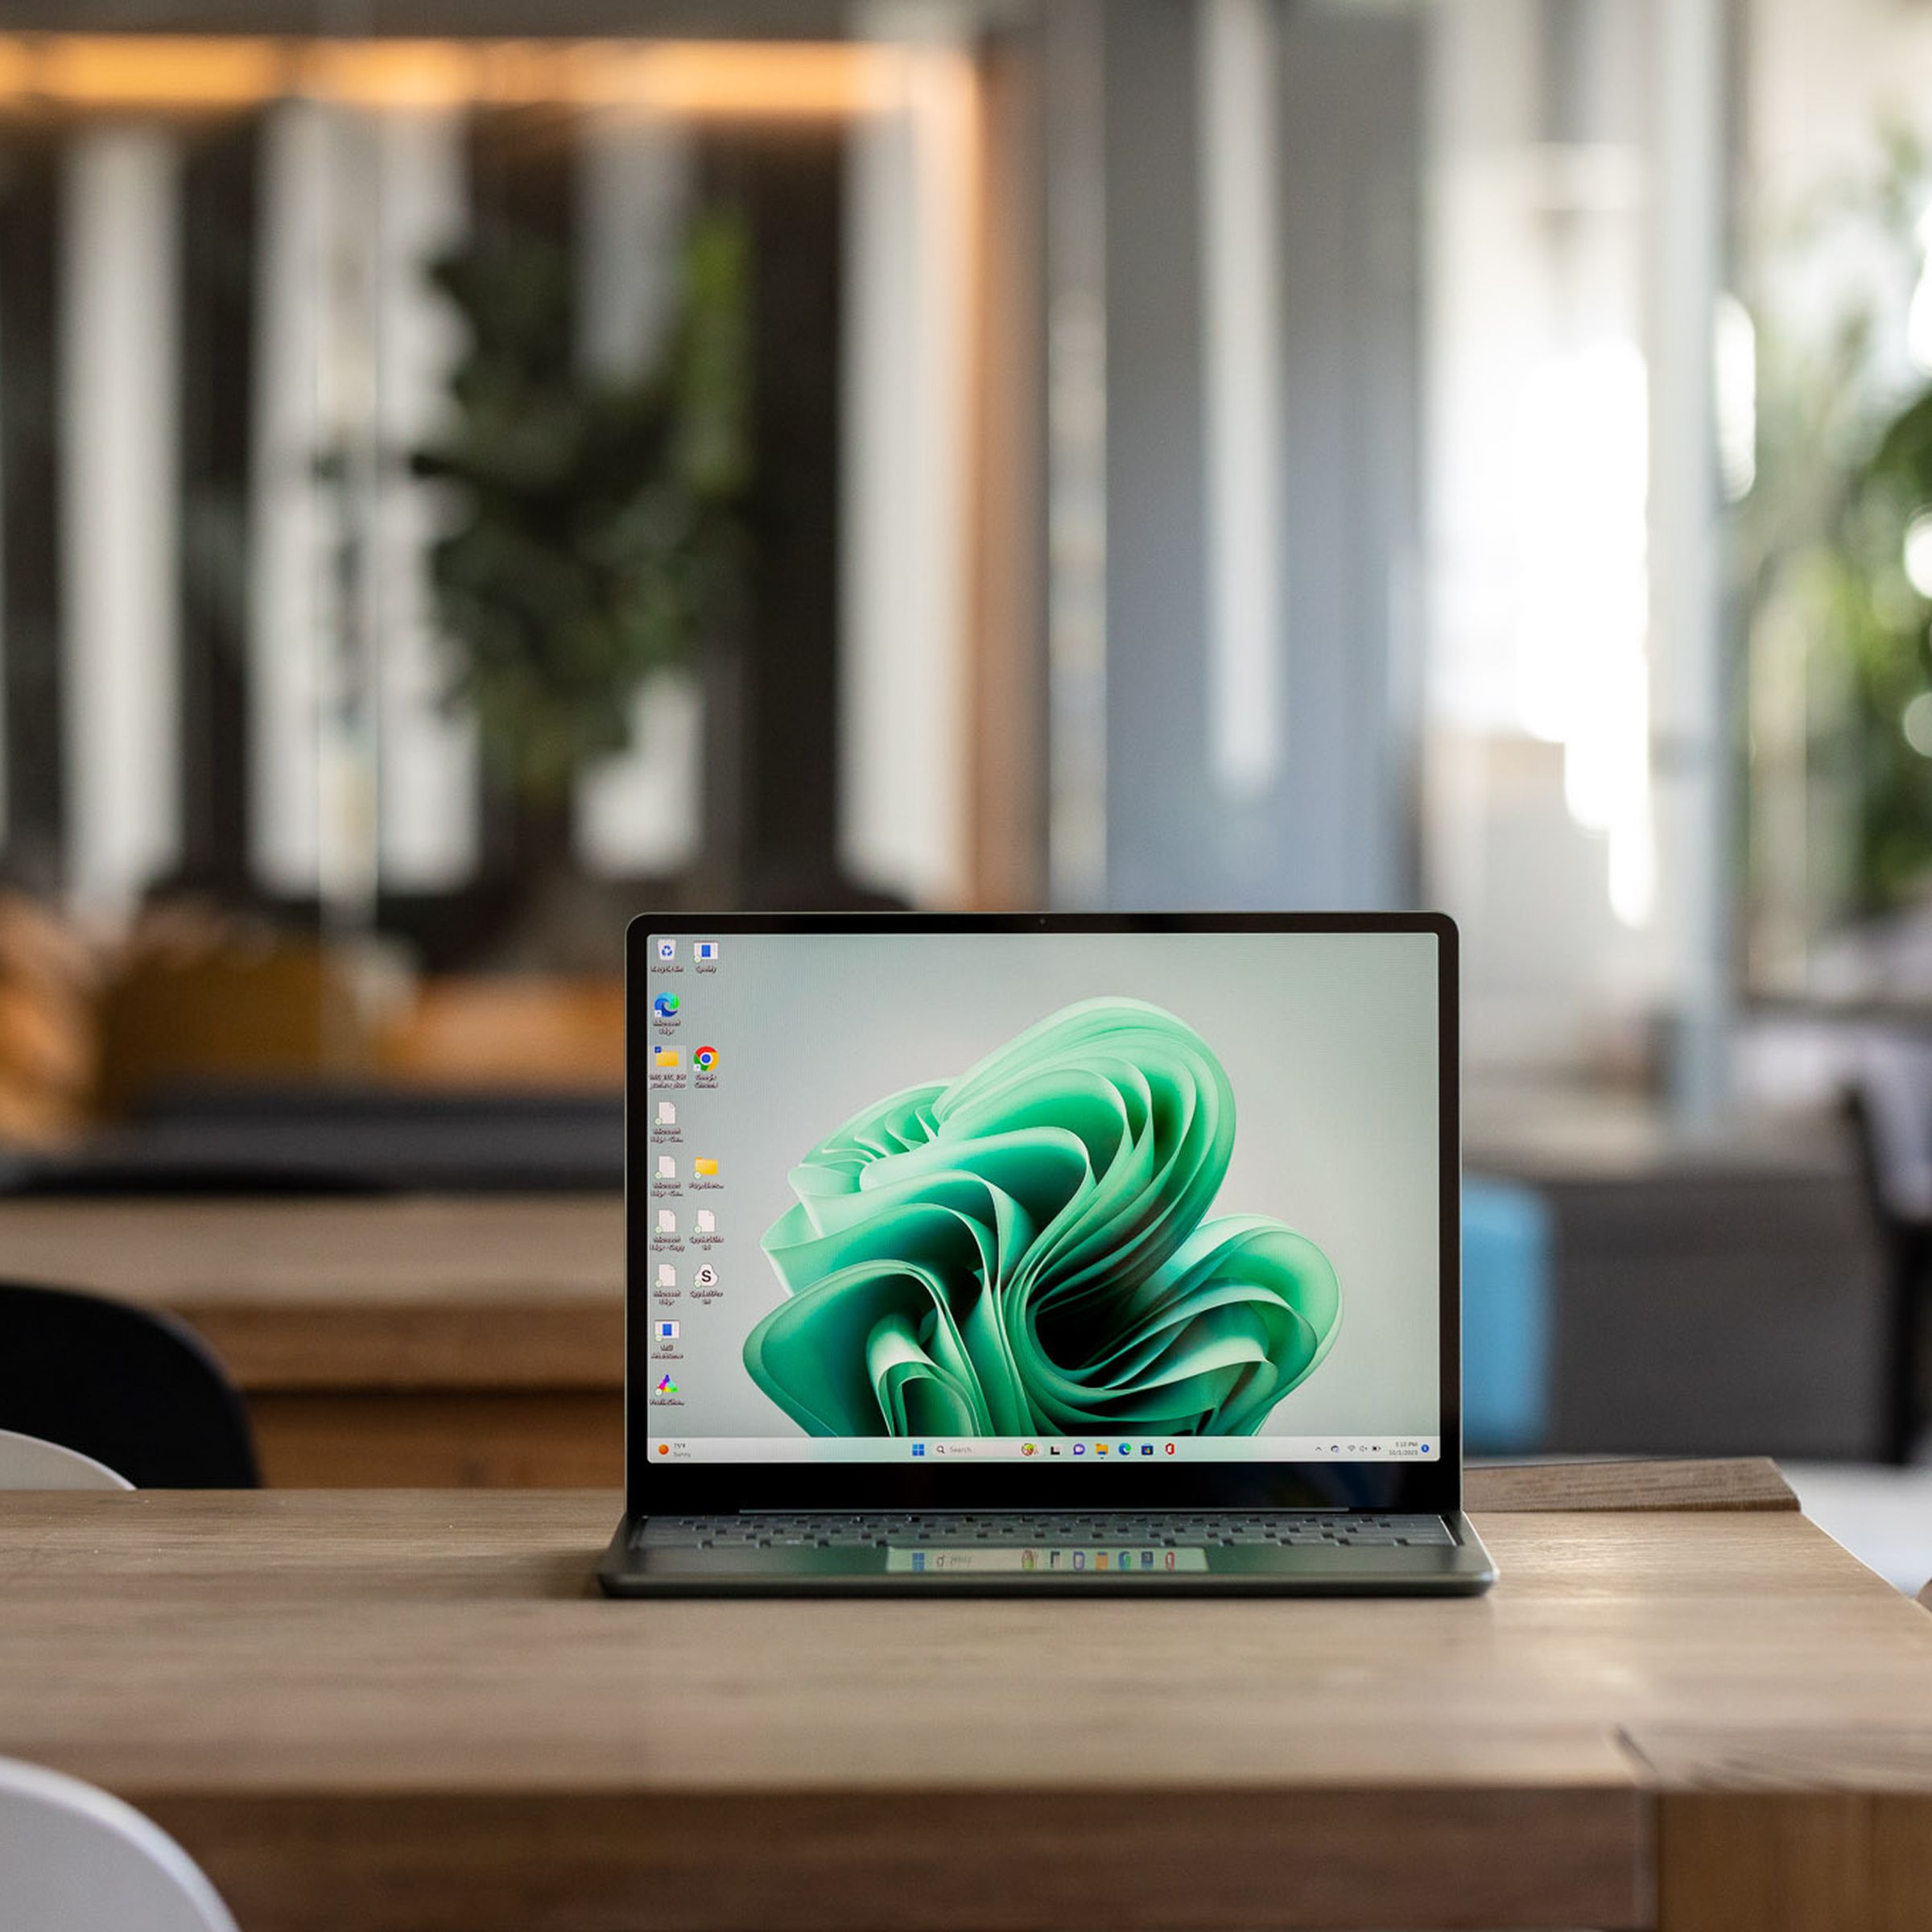 The Microsoft Surface Laptop Go 3 displaying a green Windows desktop on a table in a cafe setting.